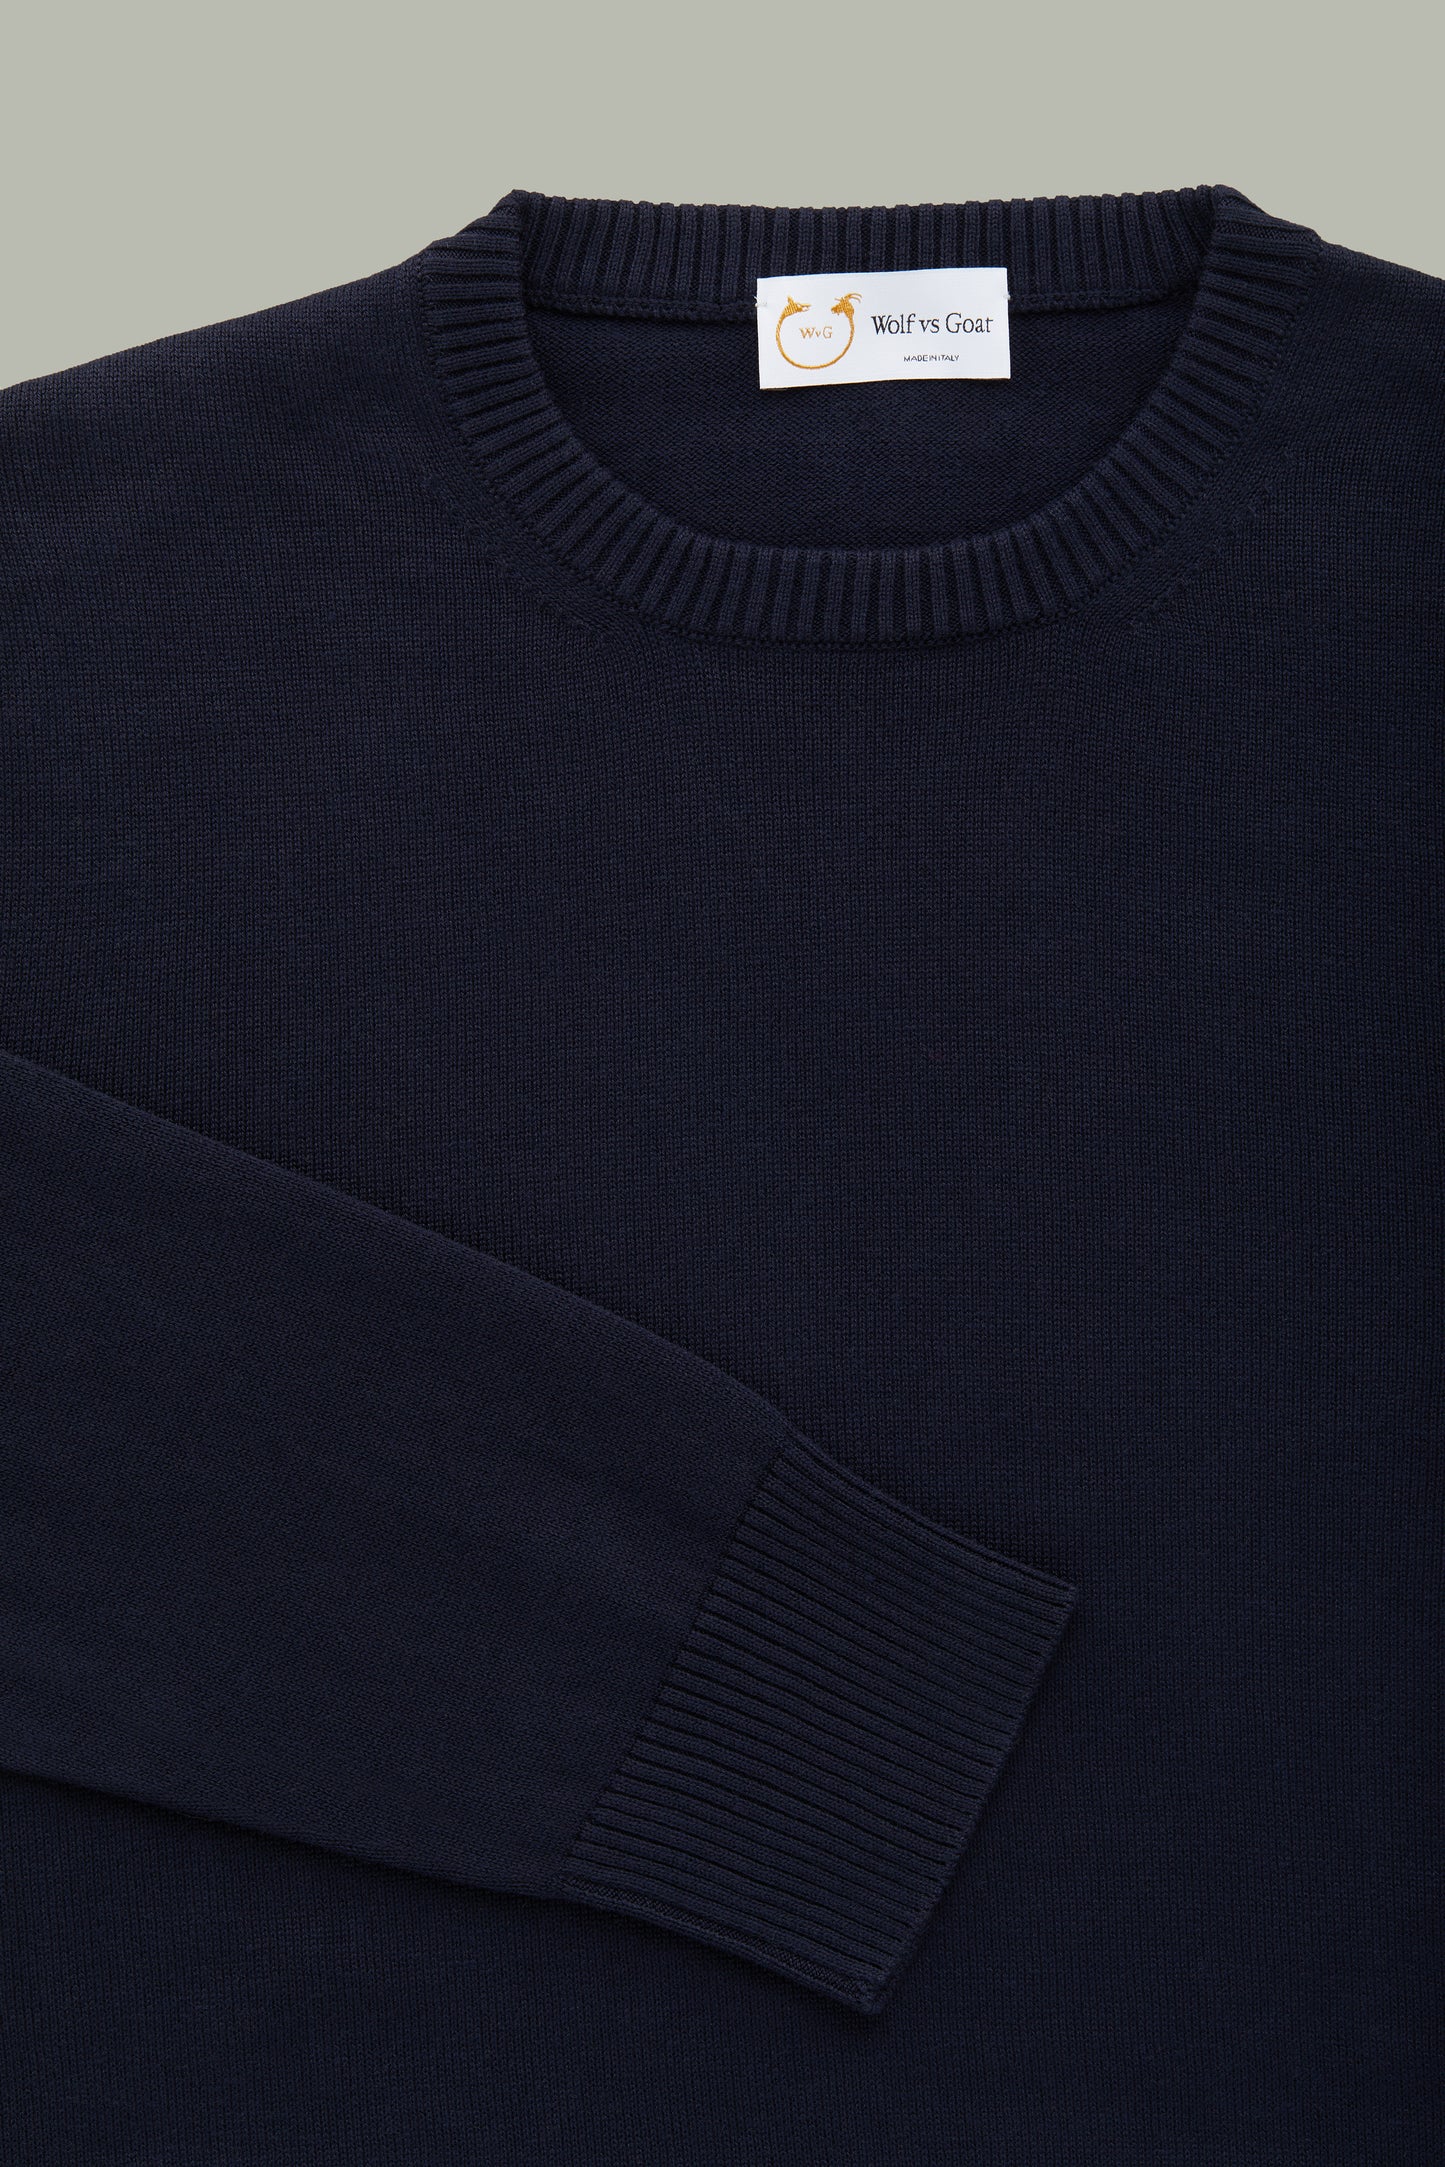 Long Sleeve Crew Neck Bamboo Cotton Cashmere Blend Knitted Sweater Navy